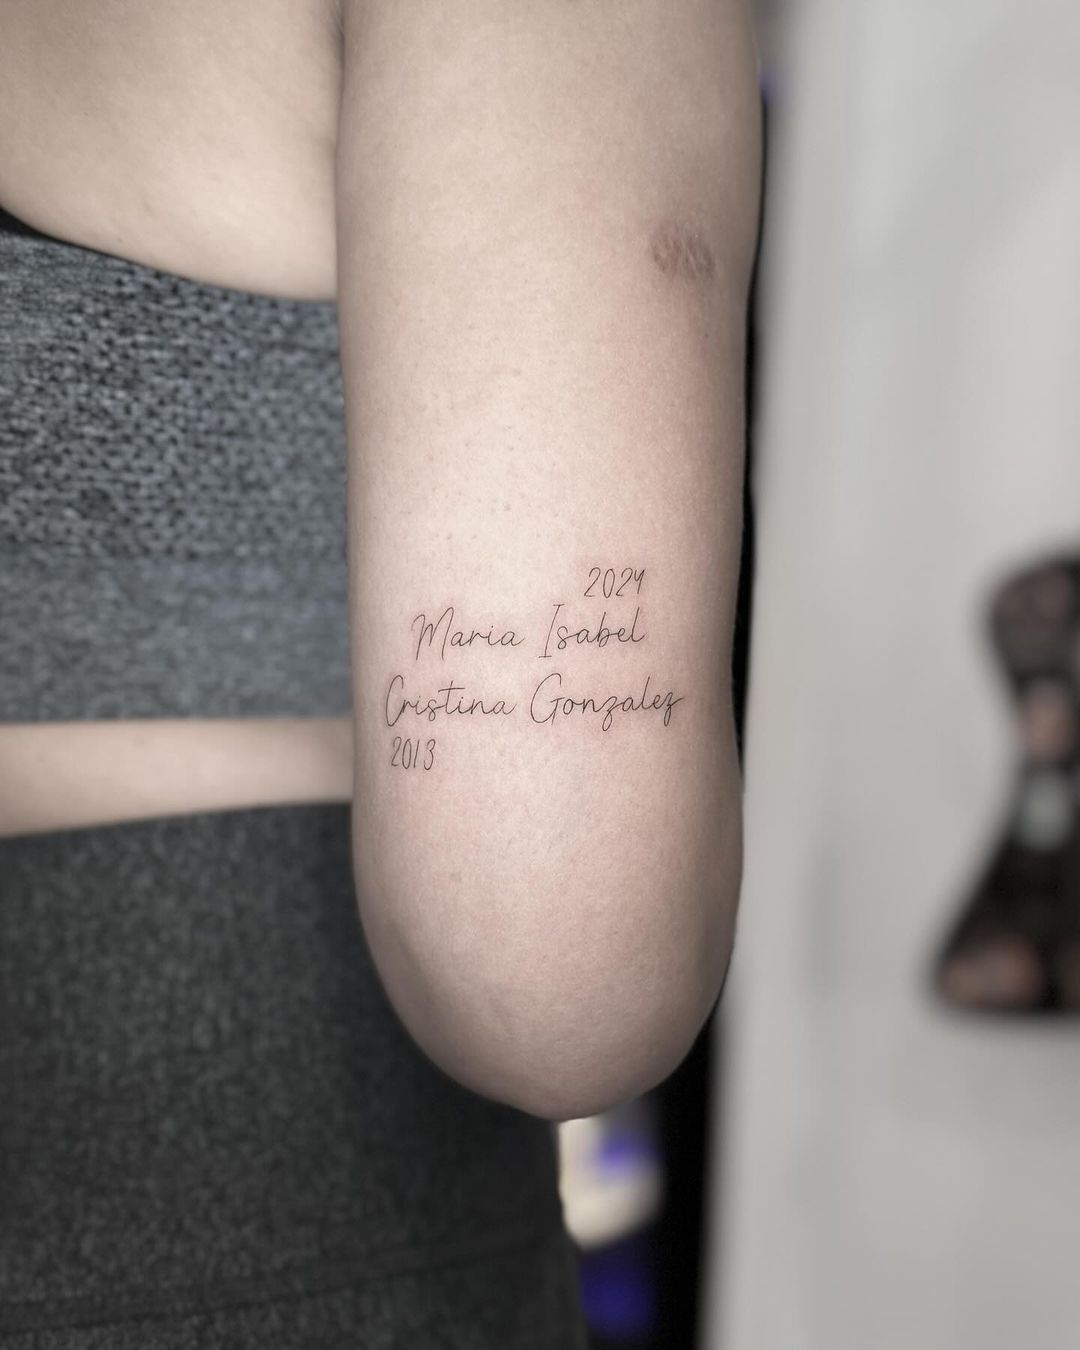 names and years tattoo